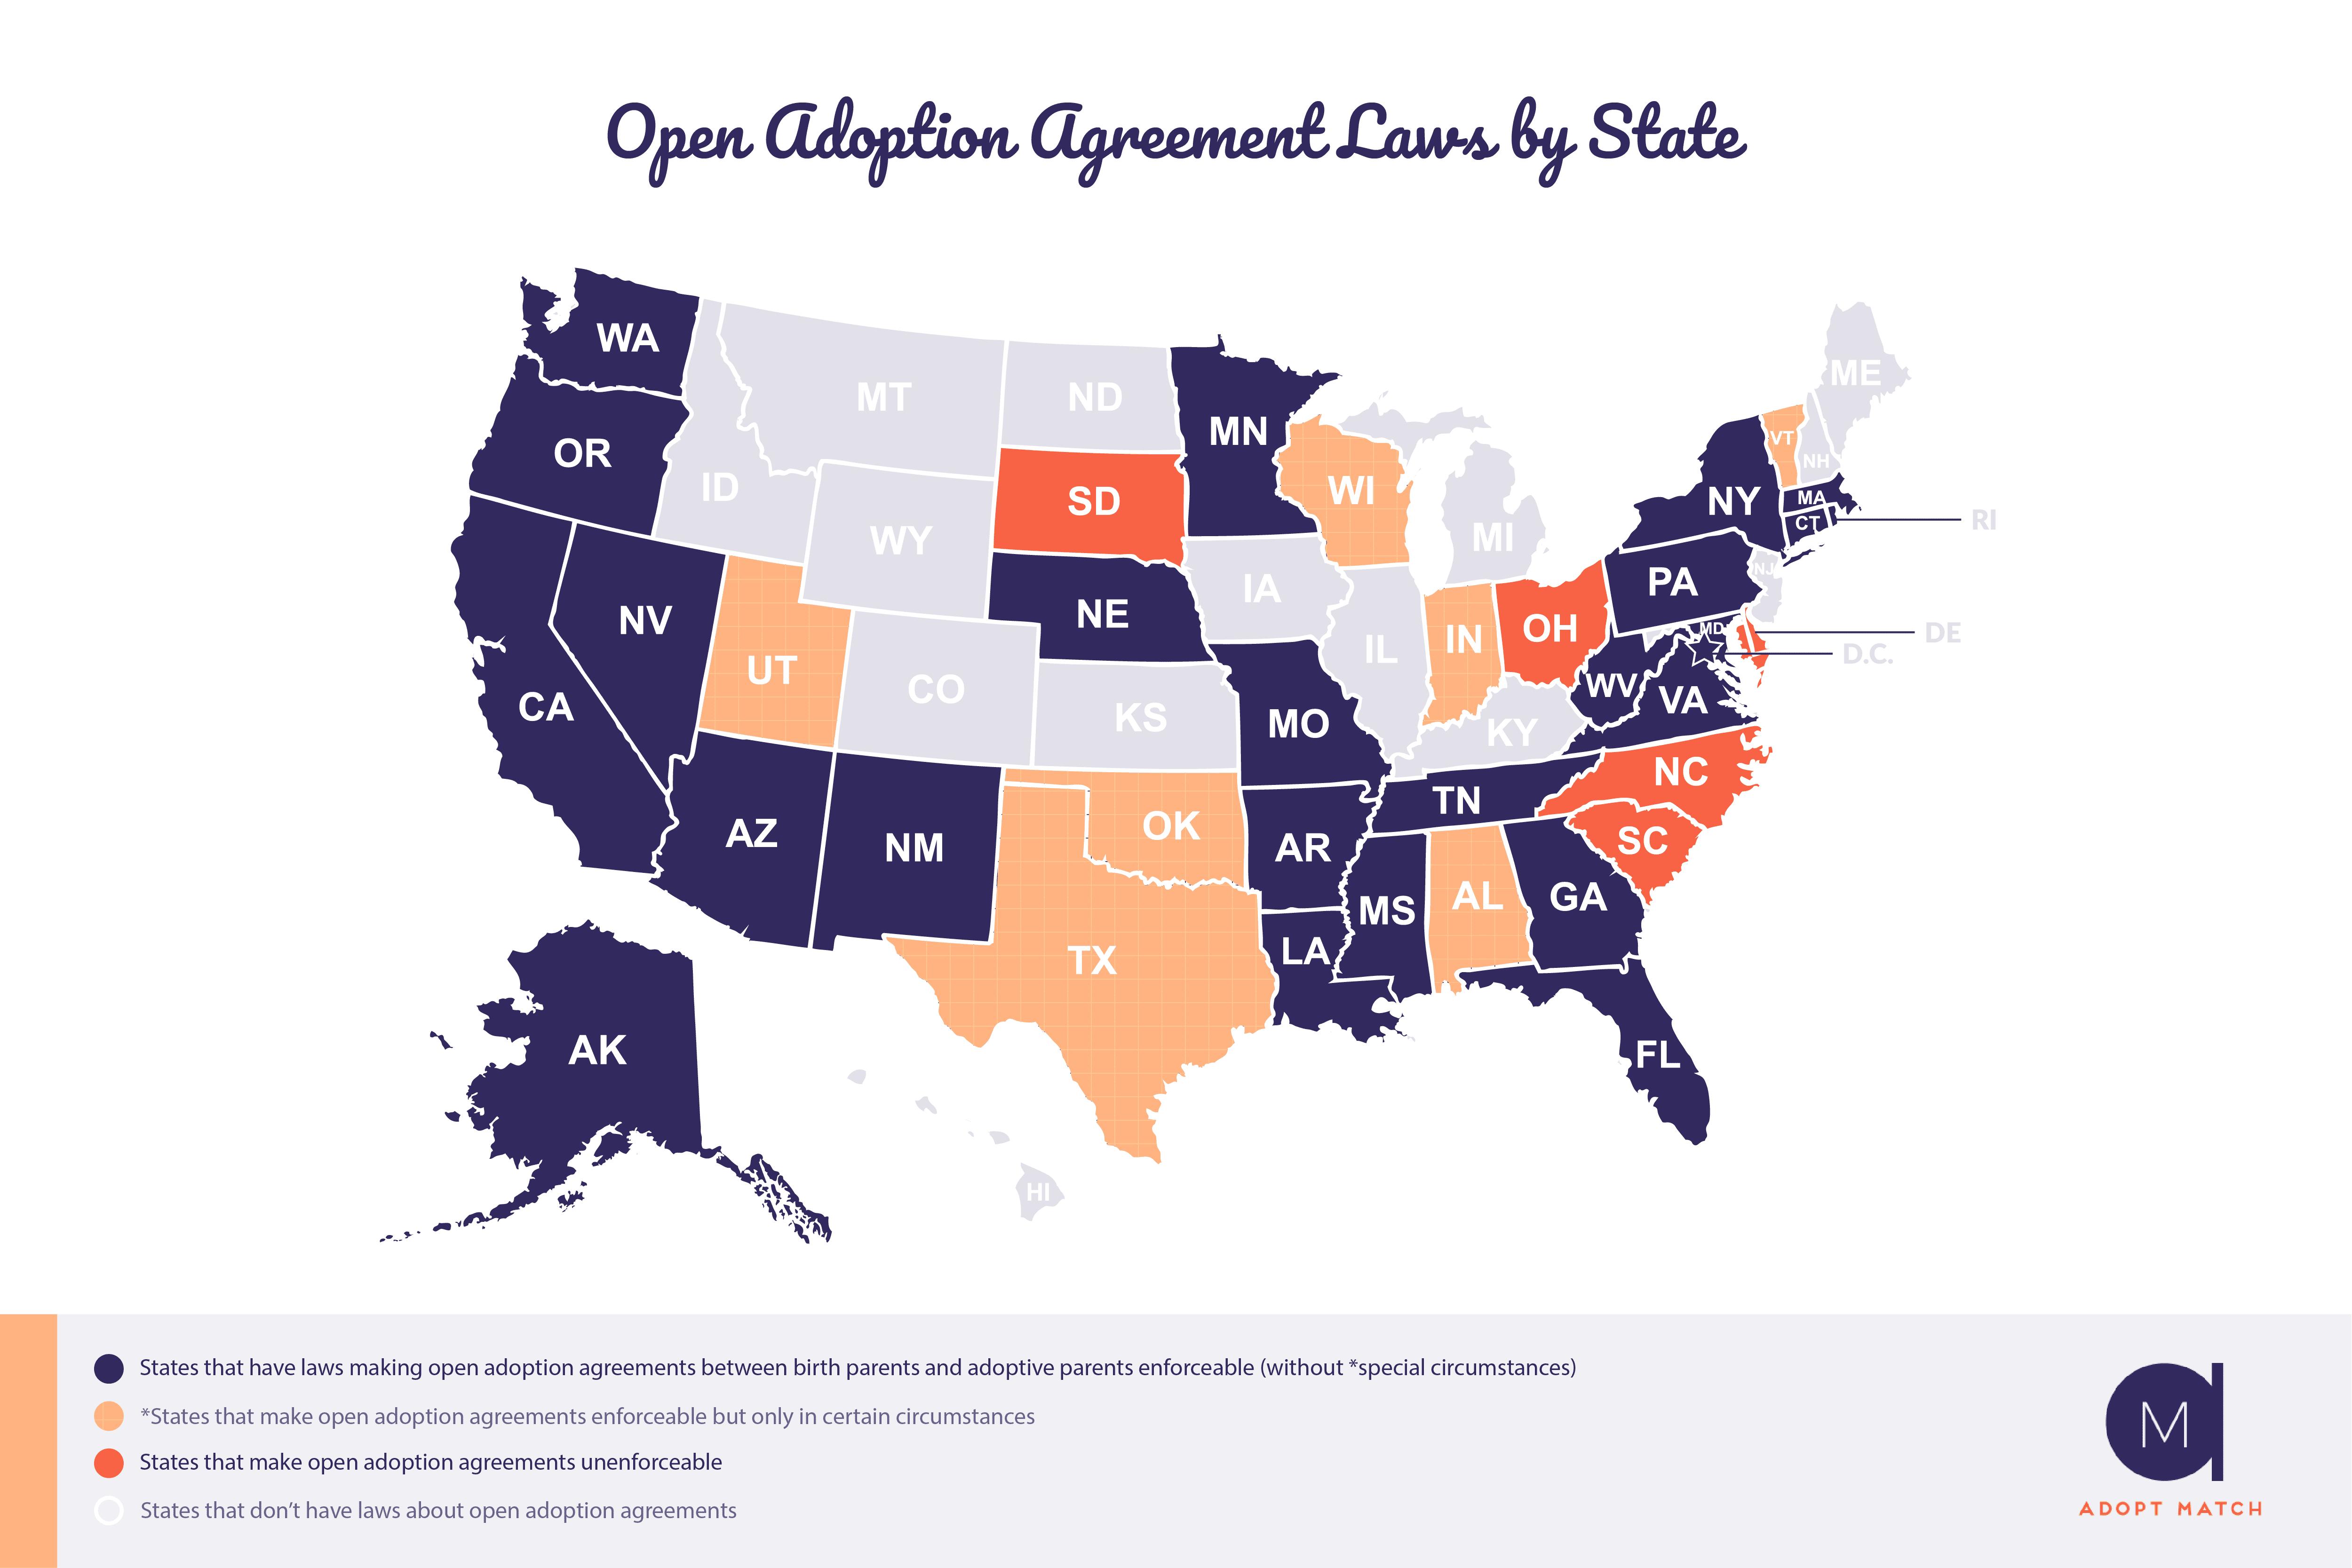 open-adoption-agreement-laws-by-state